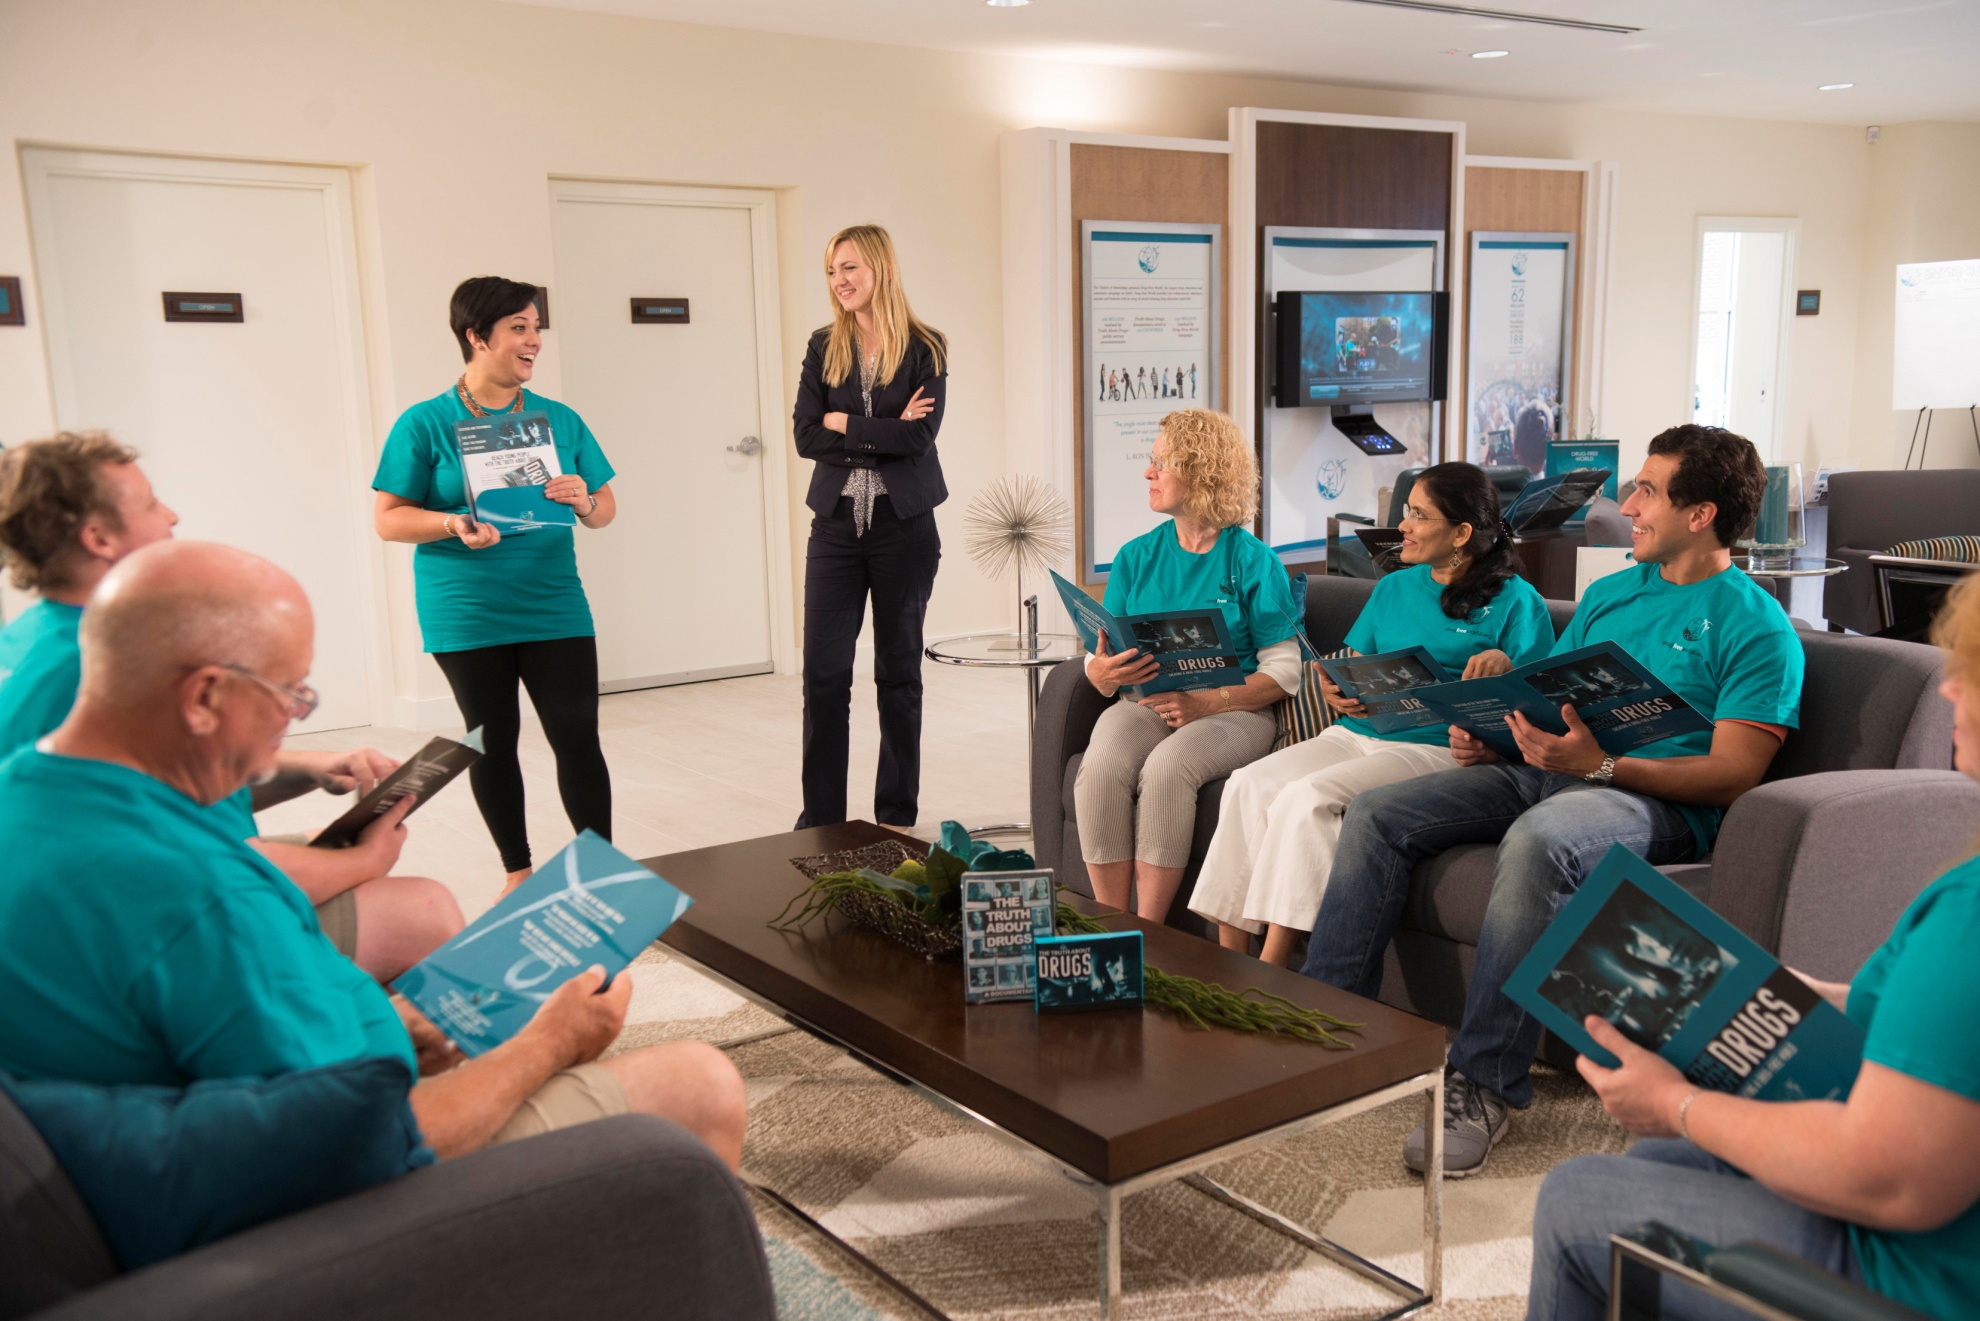 Volunteers meet at the Foundation for a Drug-Free World center in Clearwater, Florida, to plan activities to bring the program to the community.